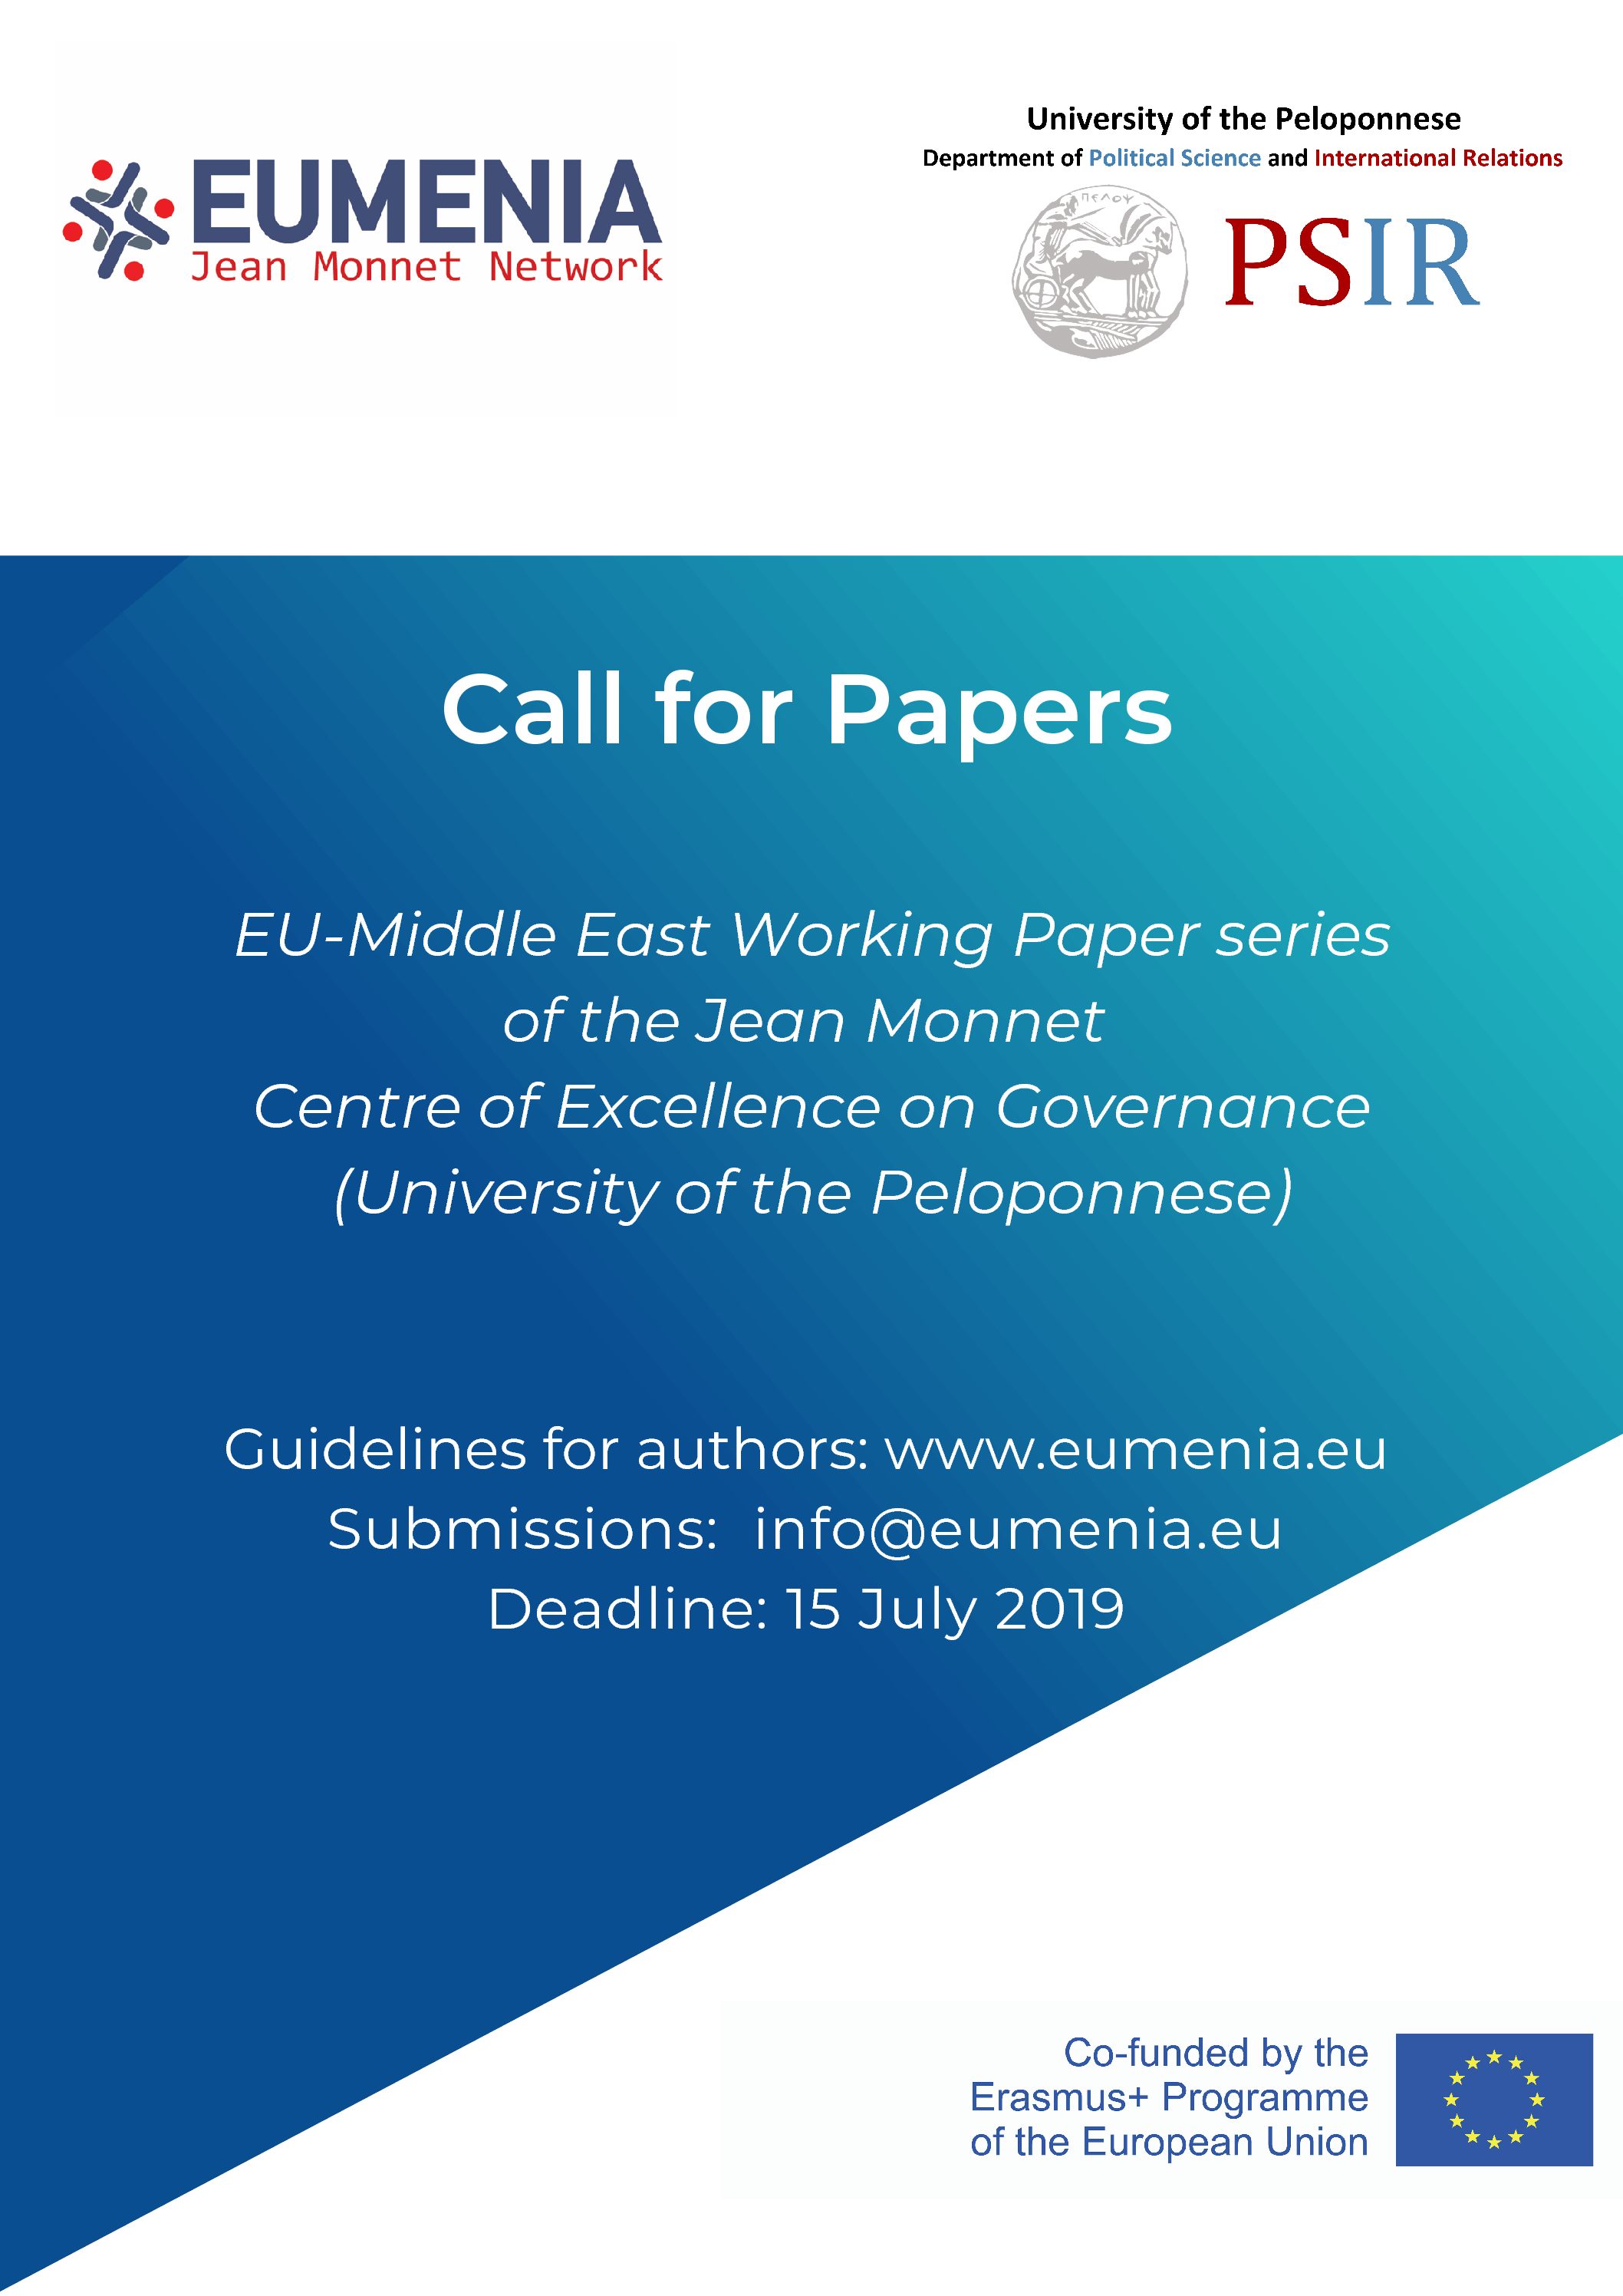 Call for Papers – EU-Middle East Working Paper Series